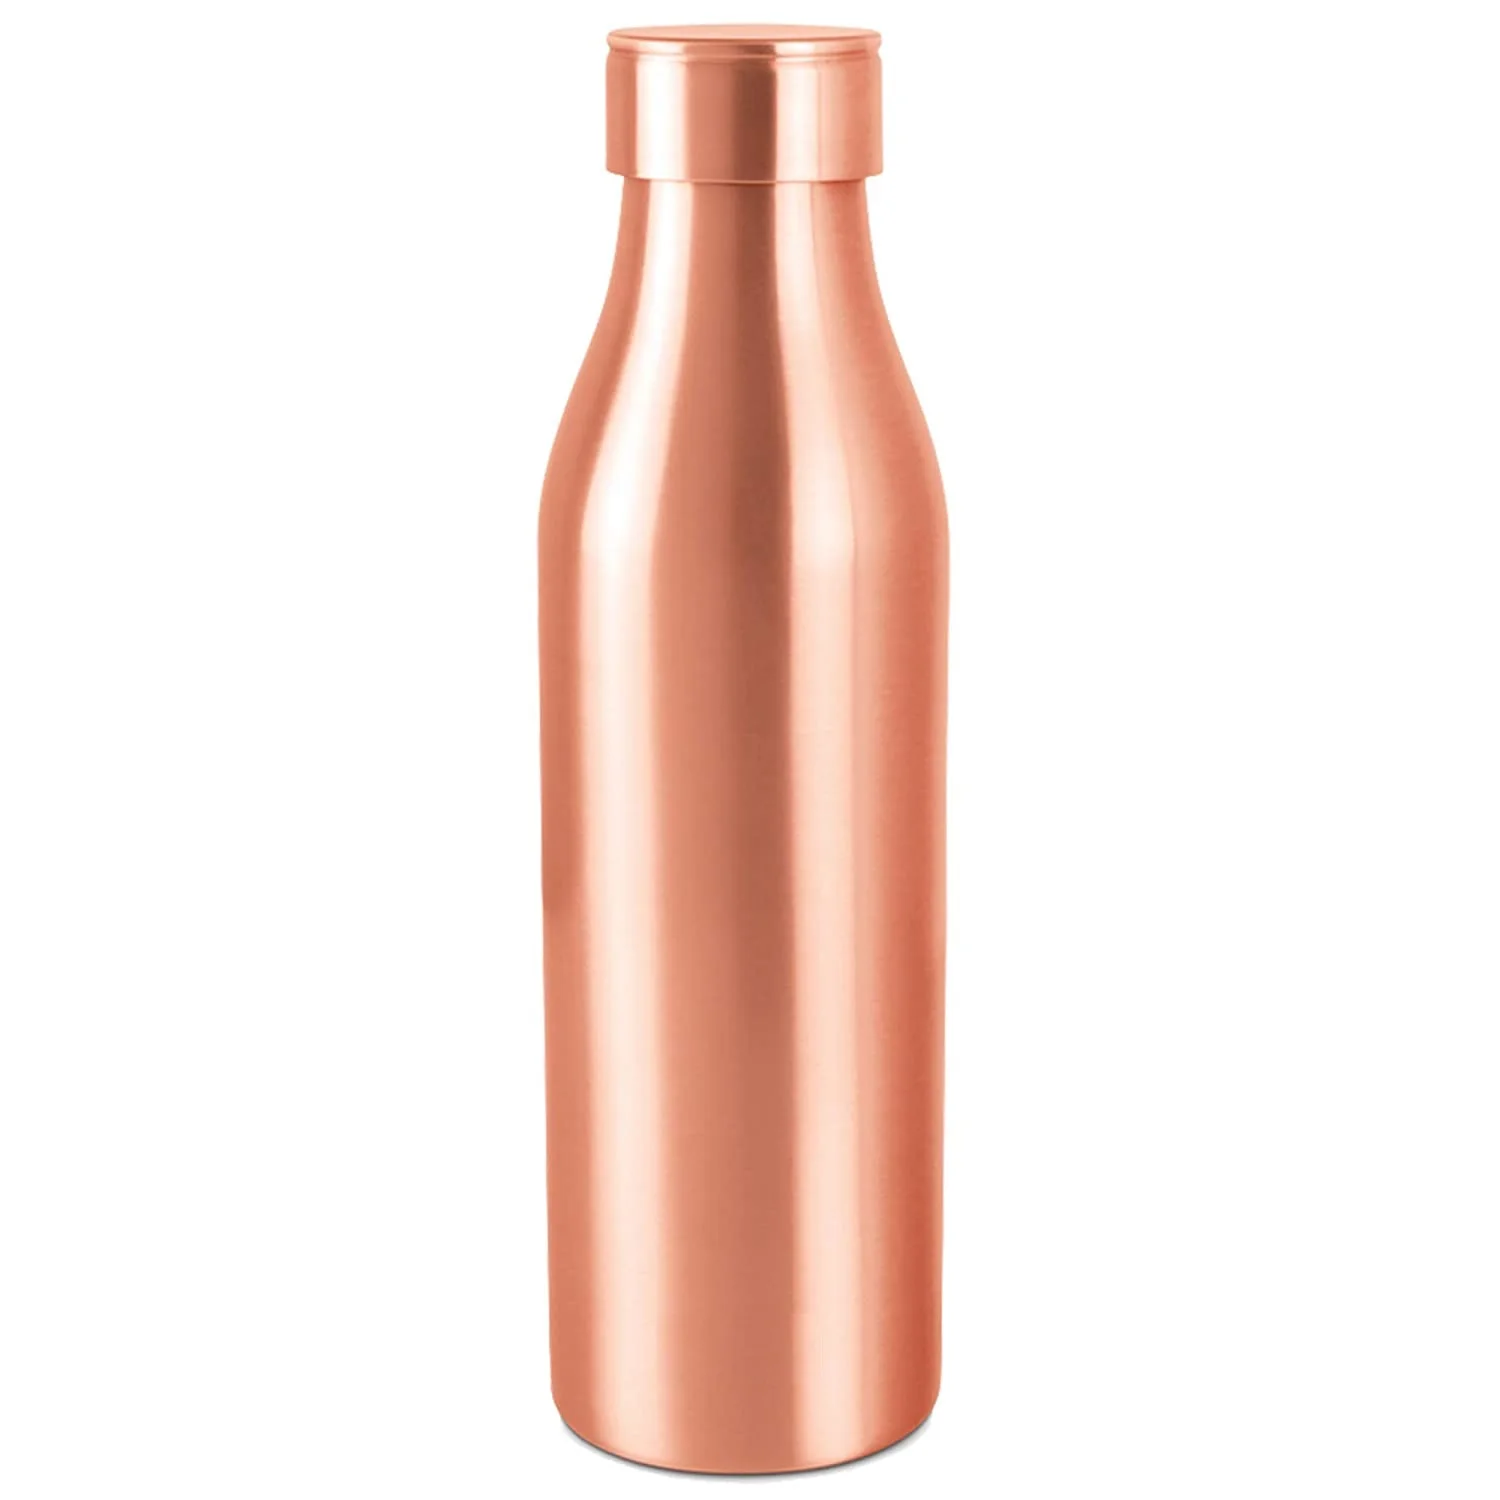 100/% Pure Hammered Copper Water Bottle For Yoga Ayurveda Health Benefits 950 ml